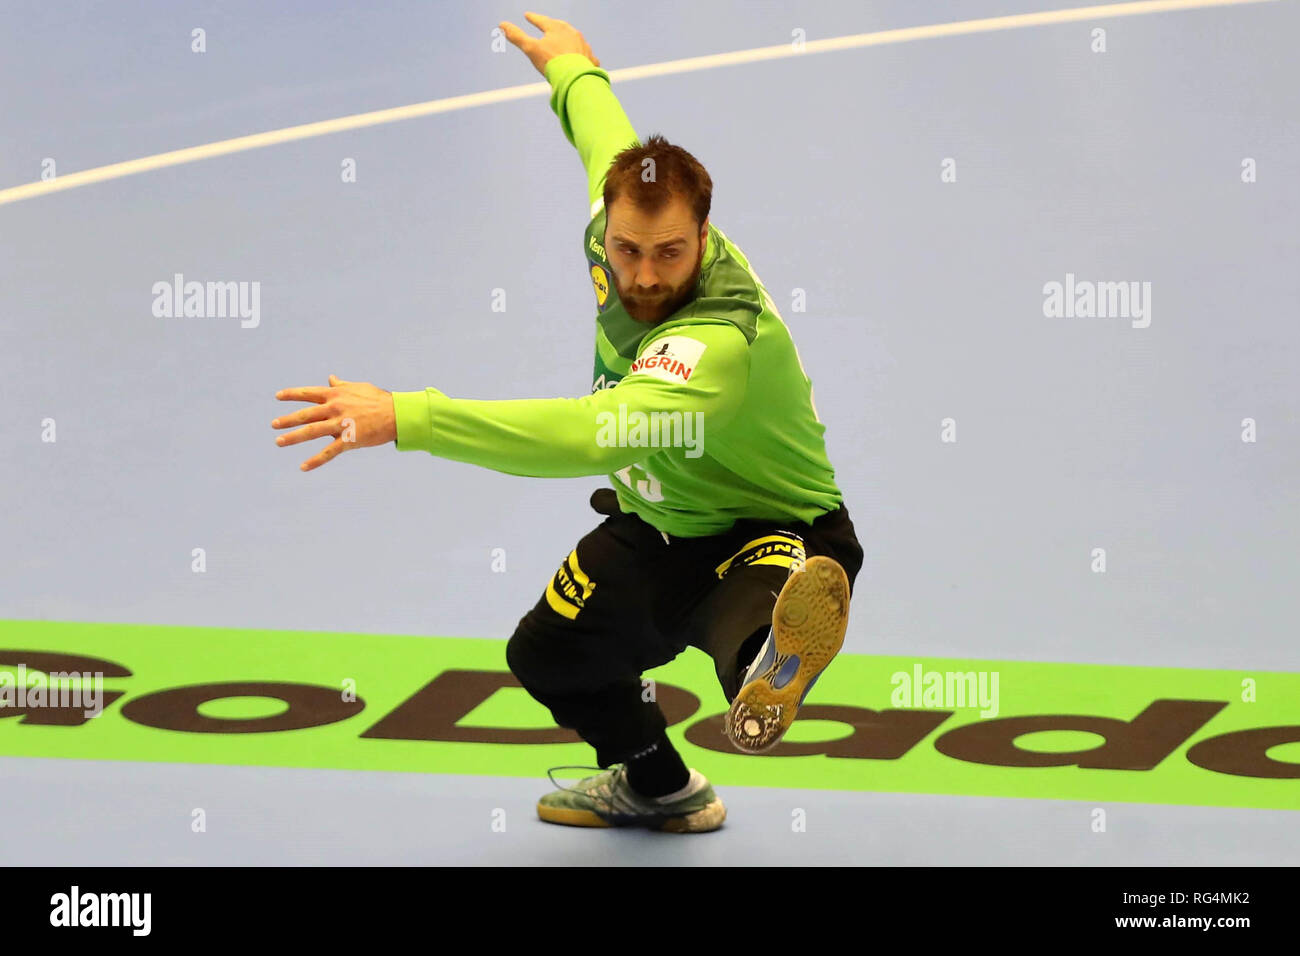 Herning, Denmark. 27th January 2019.Andreas Wolff (Germany) during the IHF Men's World Championship 2019, final round handball match between Germany and France on January 27, 2019 at Jyske Bank Boxen in Herning, Denmark - Photo Laurent Lairys / MAXPPP Credit: Laurent Lairys/Agence Locevaphotos/Alamy Live News Stock Photo